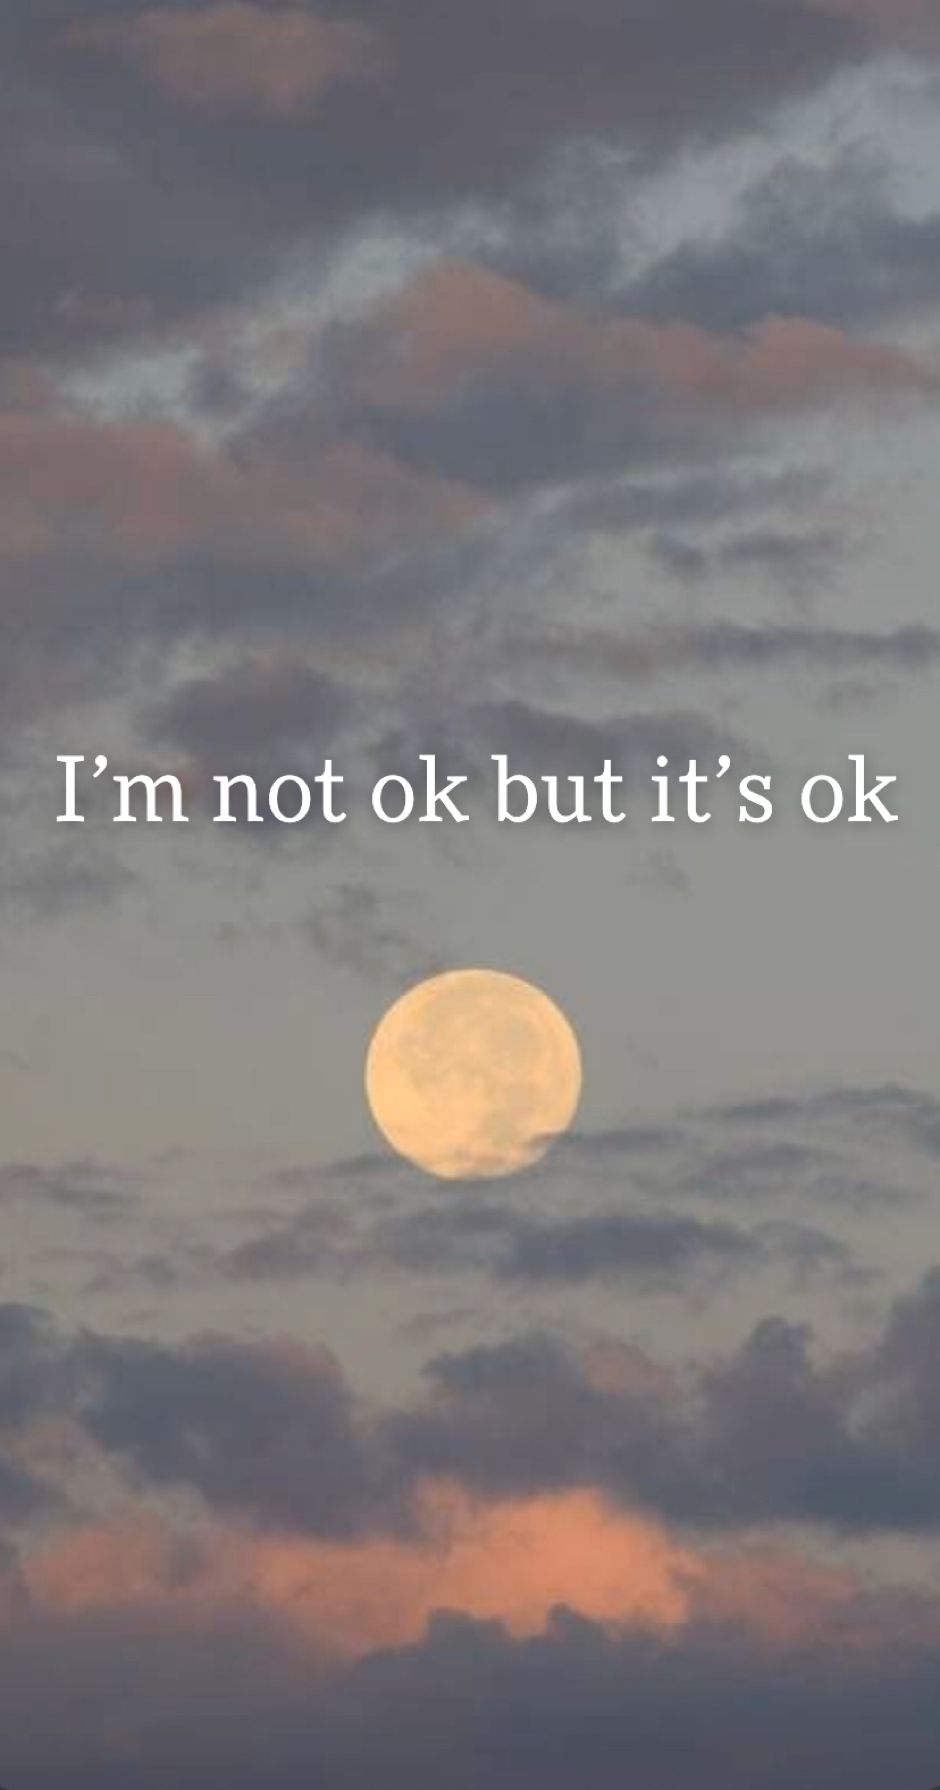 I'm not ok but it's ok. Positive quotes, Funny quotes, Memes quotes